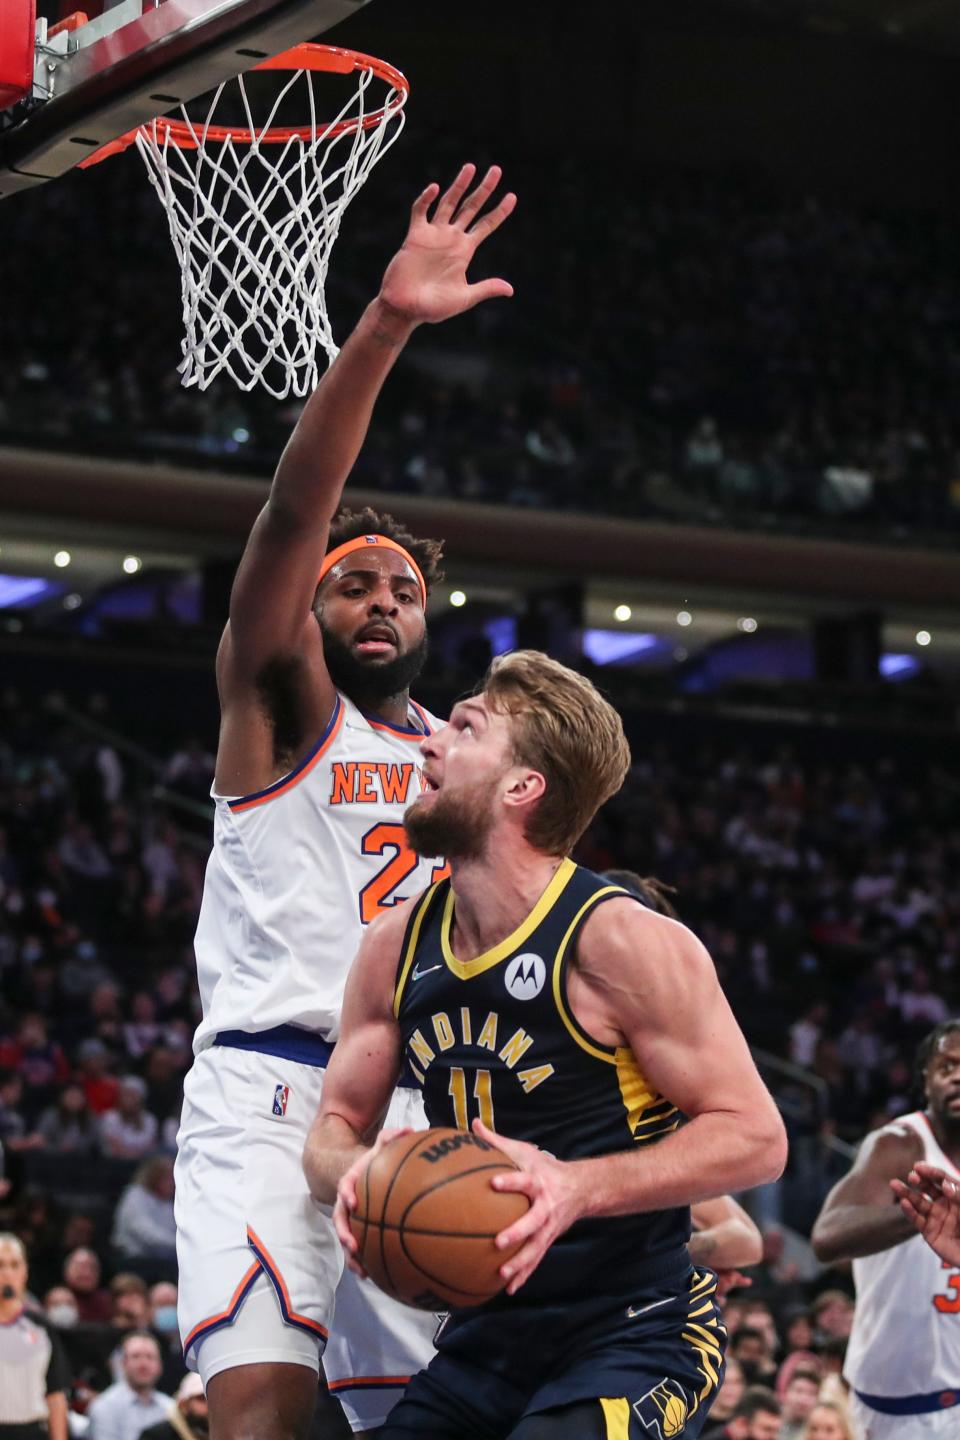 Jan 4, 2022; New York, New York, USA;  Indiana Pacers forward Domantas Sabonis (11) looks to post up against New York Knicks center Mitchell Robinson (23) in the second quarter at Madison Square Garden. Mandatory Credit: Wendell Cruz-USA TODAY Sports